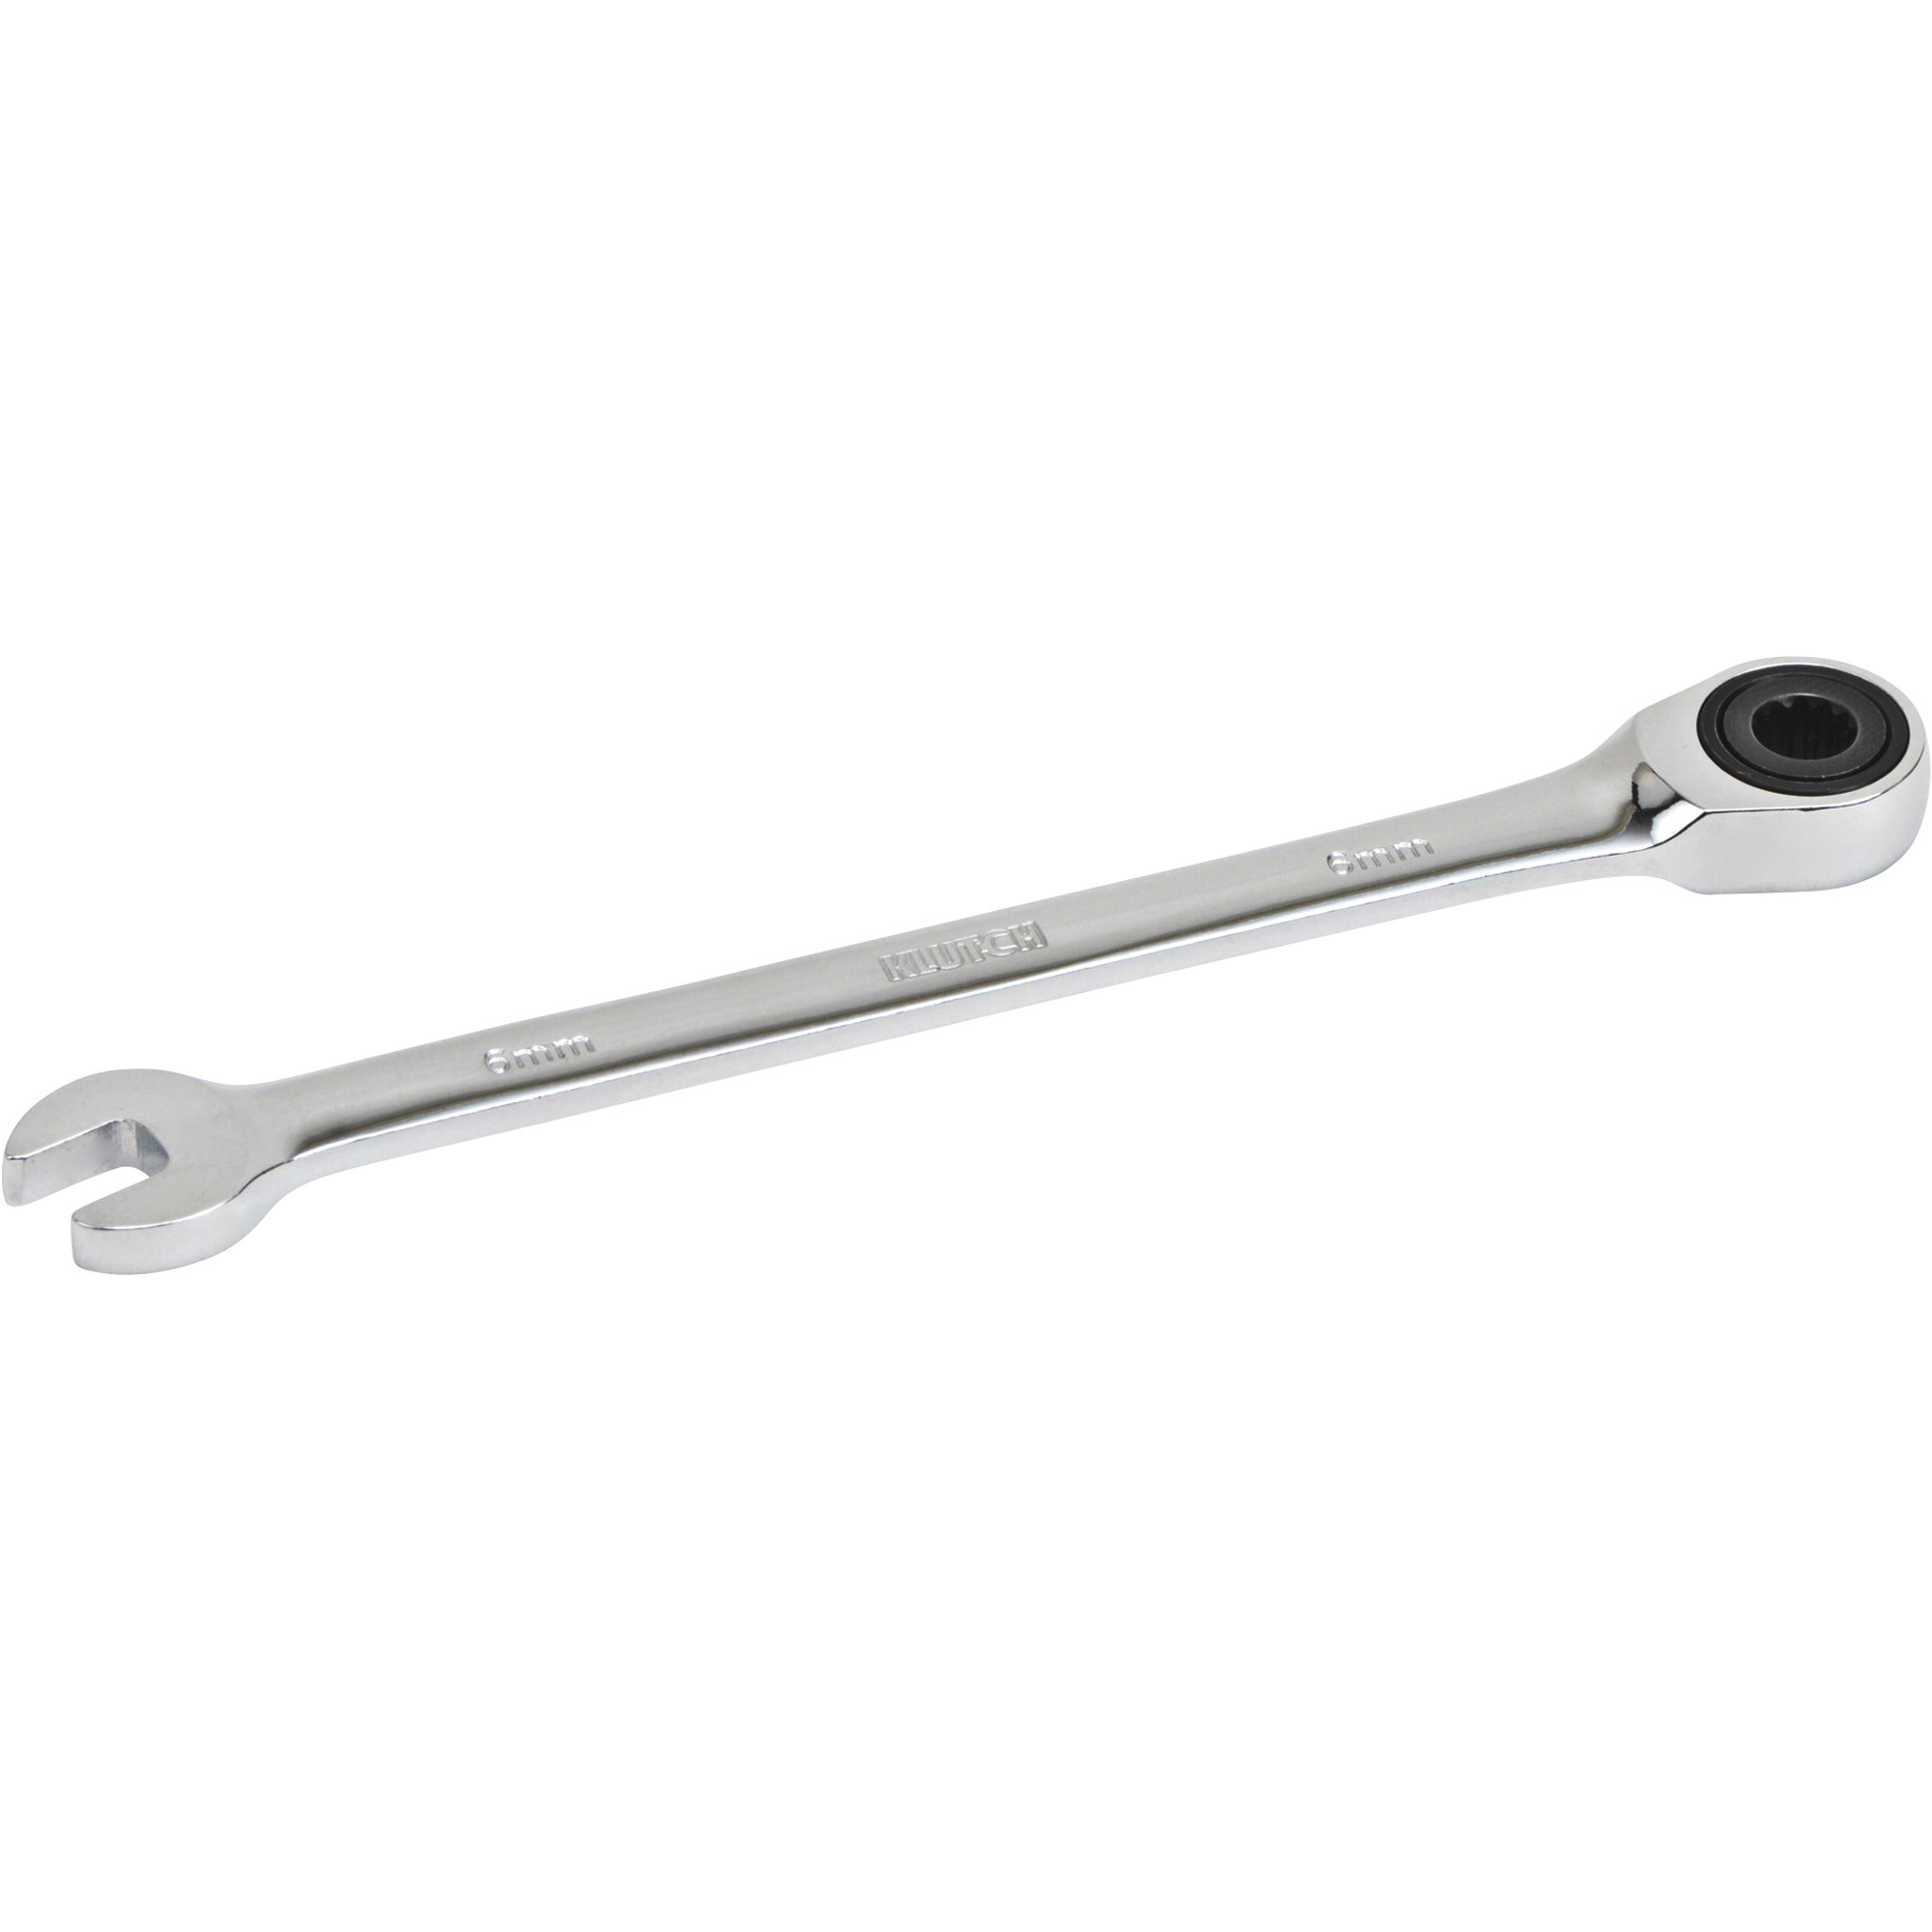 Klutch Ratcheting Wrench, Metric, 6mm